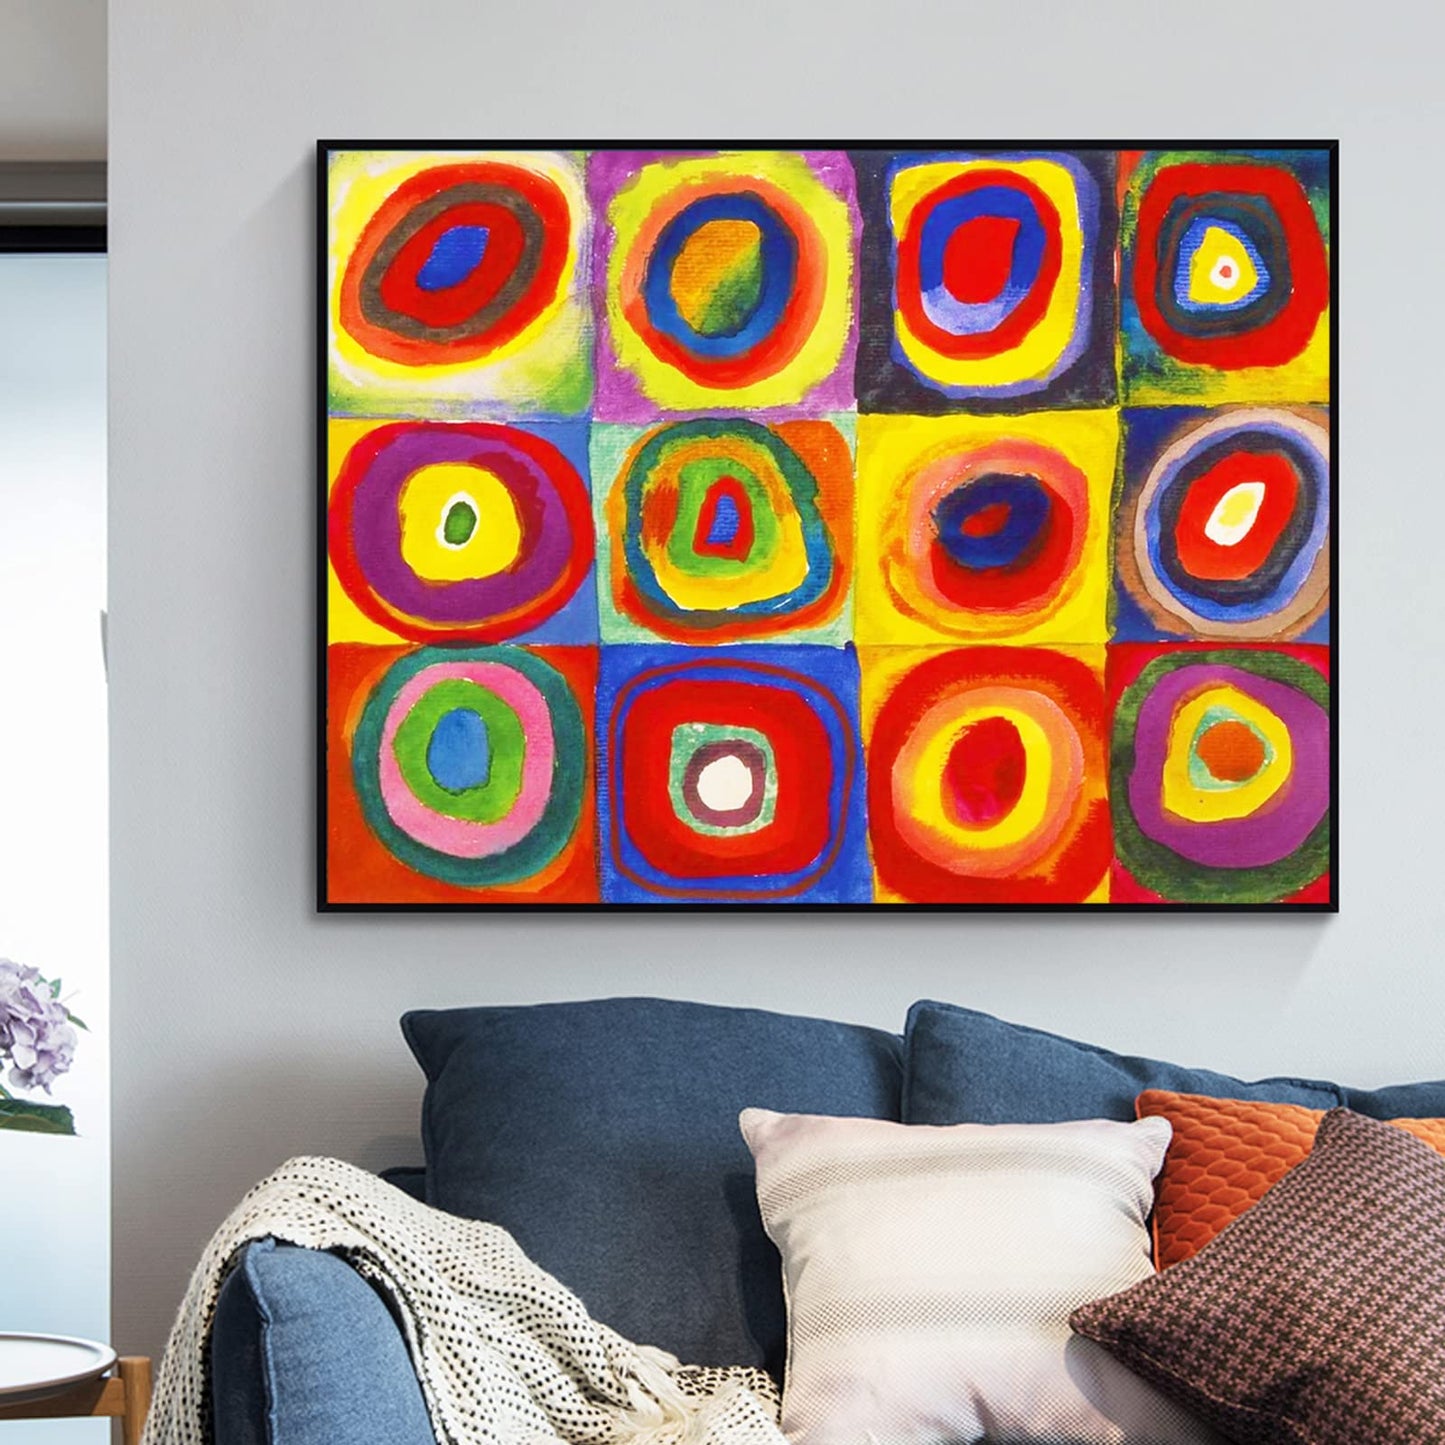 Wassily Kandinsky Wall Art - Squares with Concentric Circles Poster - Fine Art Prints - Abstract Canvas Wall Art Colorful Painting for Living Room Bedroom Home Decor Unframed (12x16in/30x40cm)